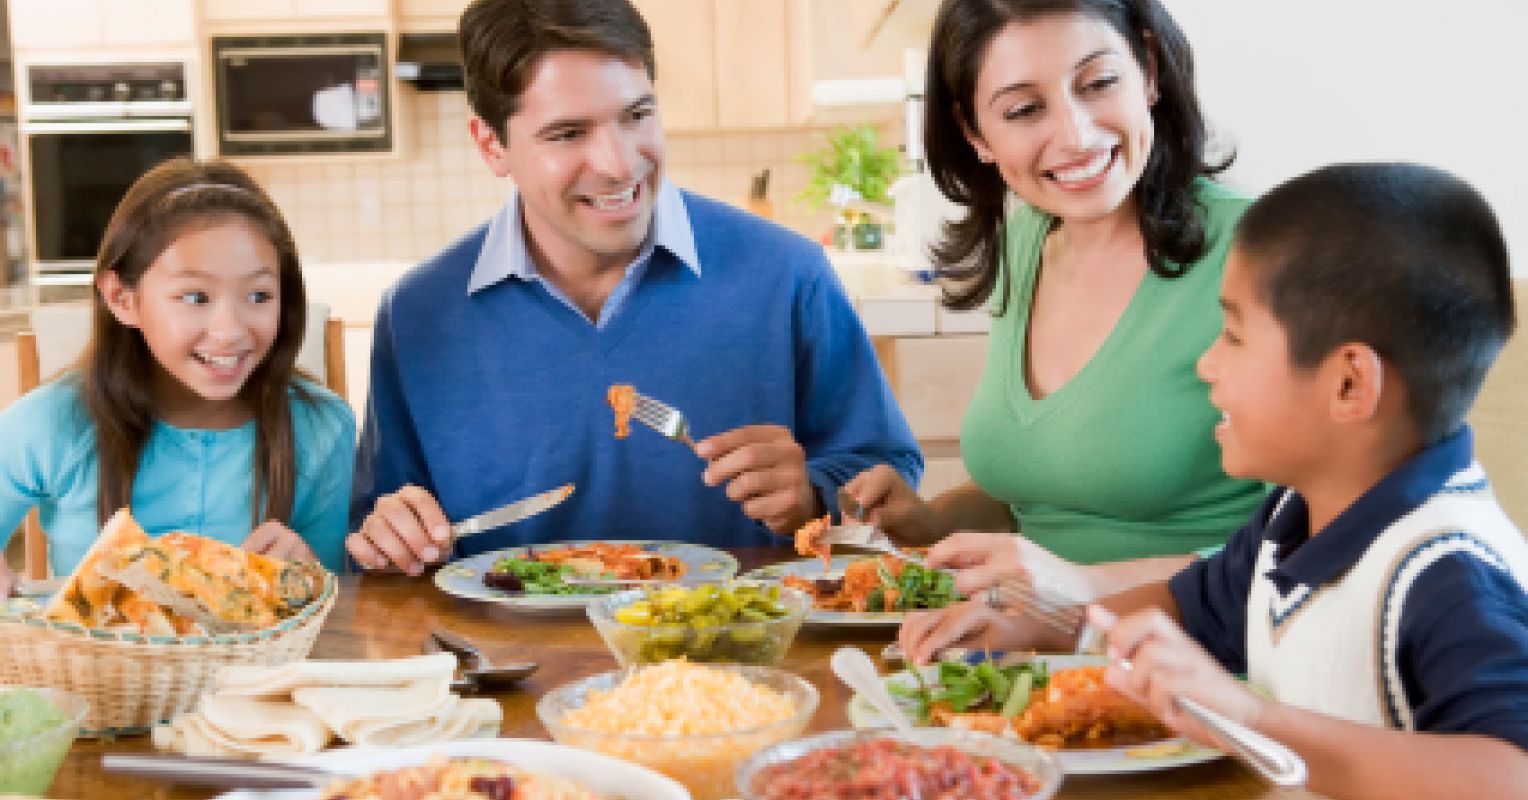 The Death of the Family Meal | Psychology Today